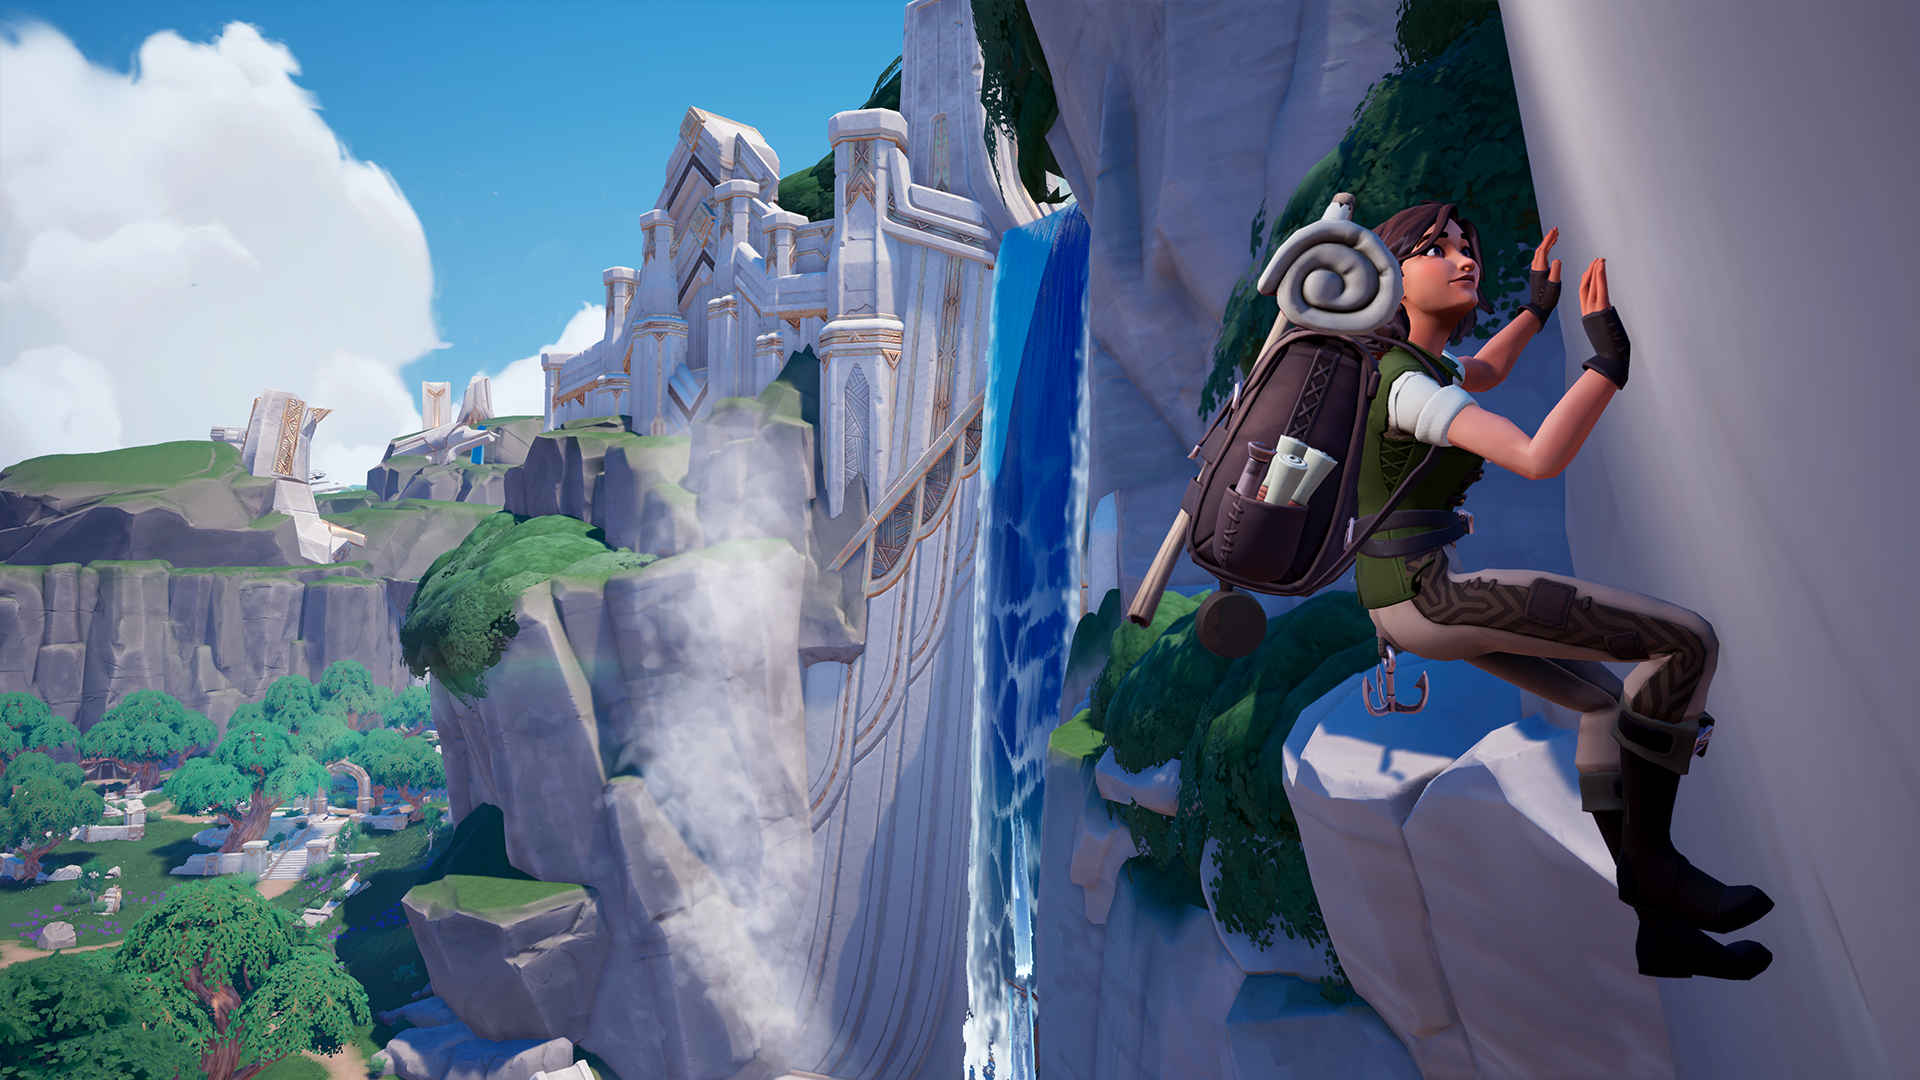 A human player in Palia, wearing the cash shop explorer gear, sclaes a sheer cliffface. In the background is a rushing waterfalls and white and gold ruins.